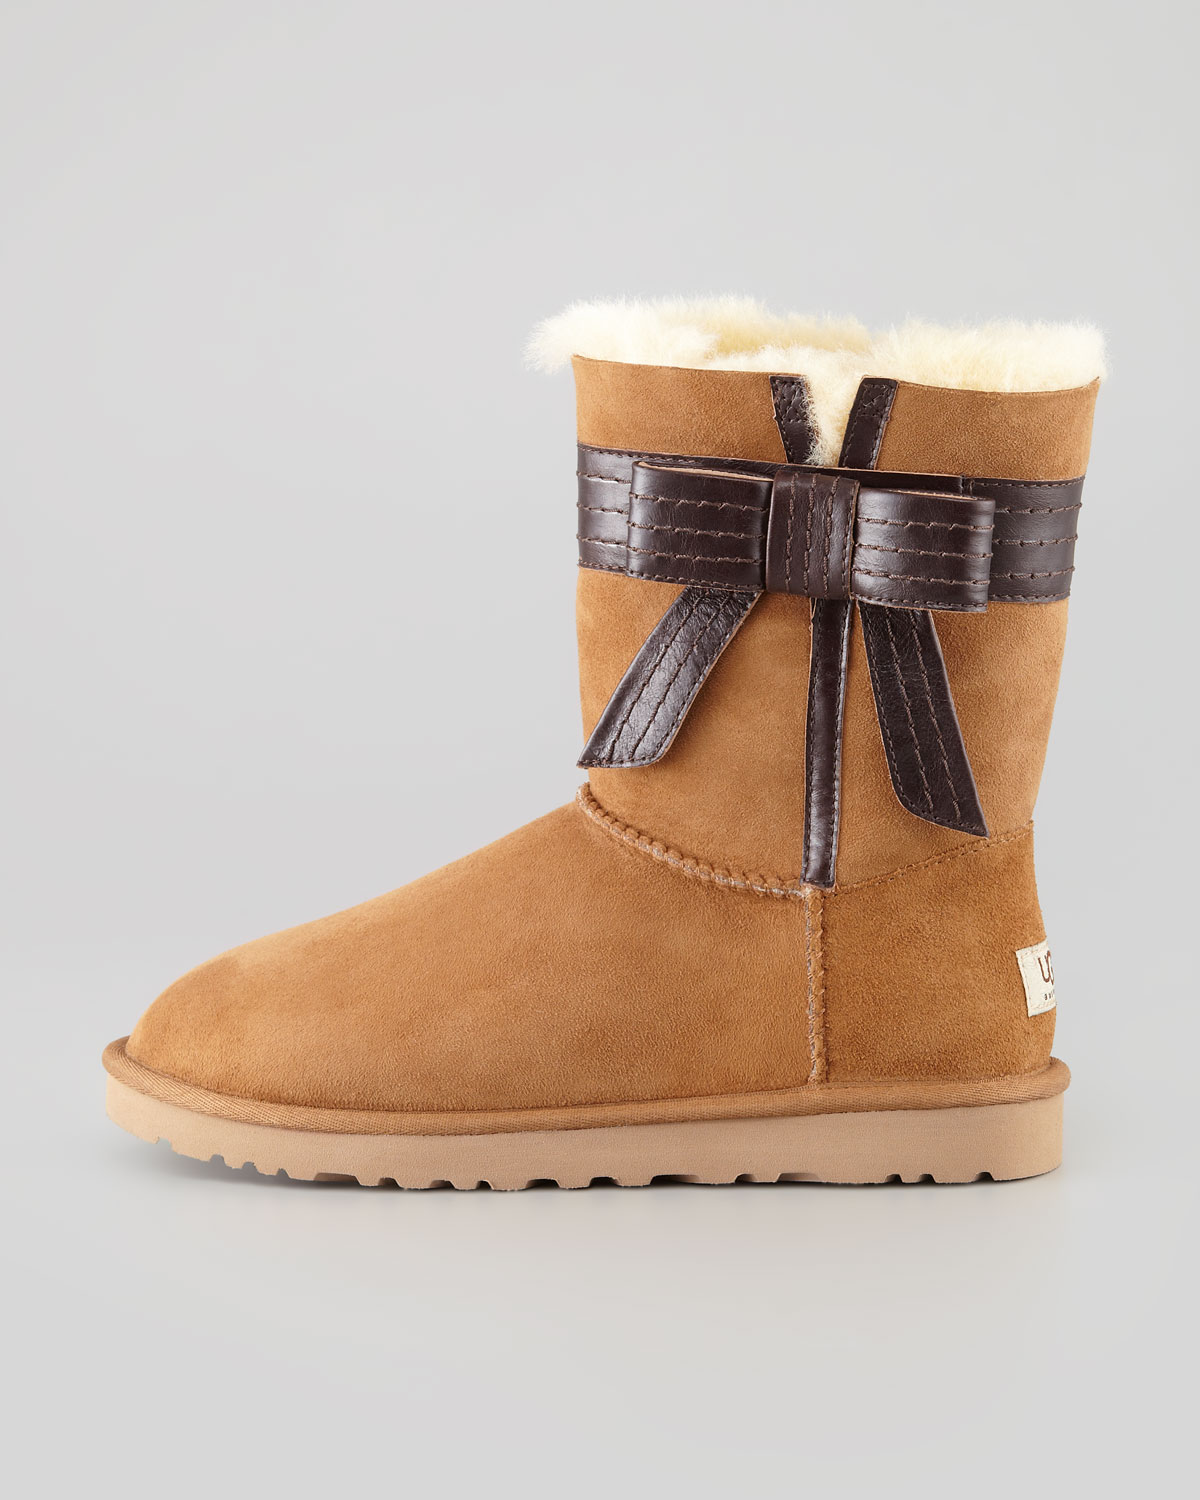 uggs with bow on side